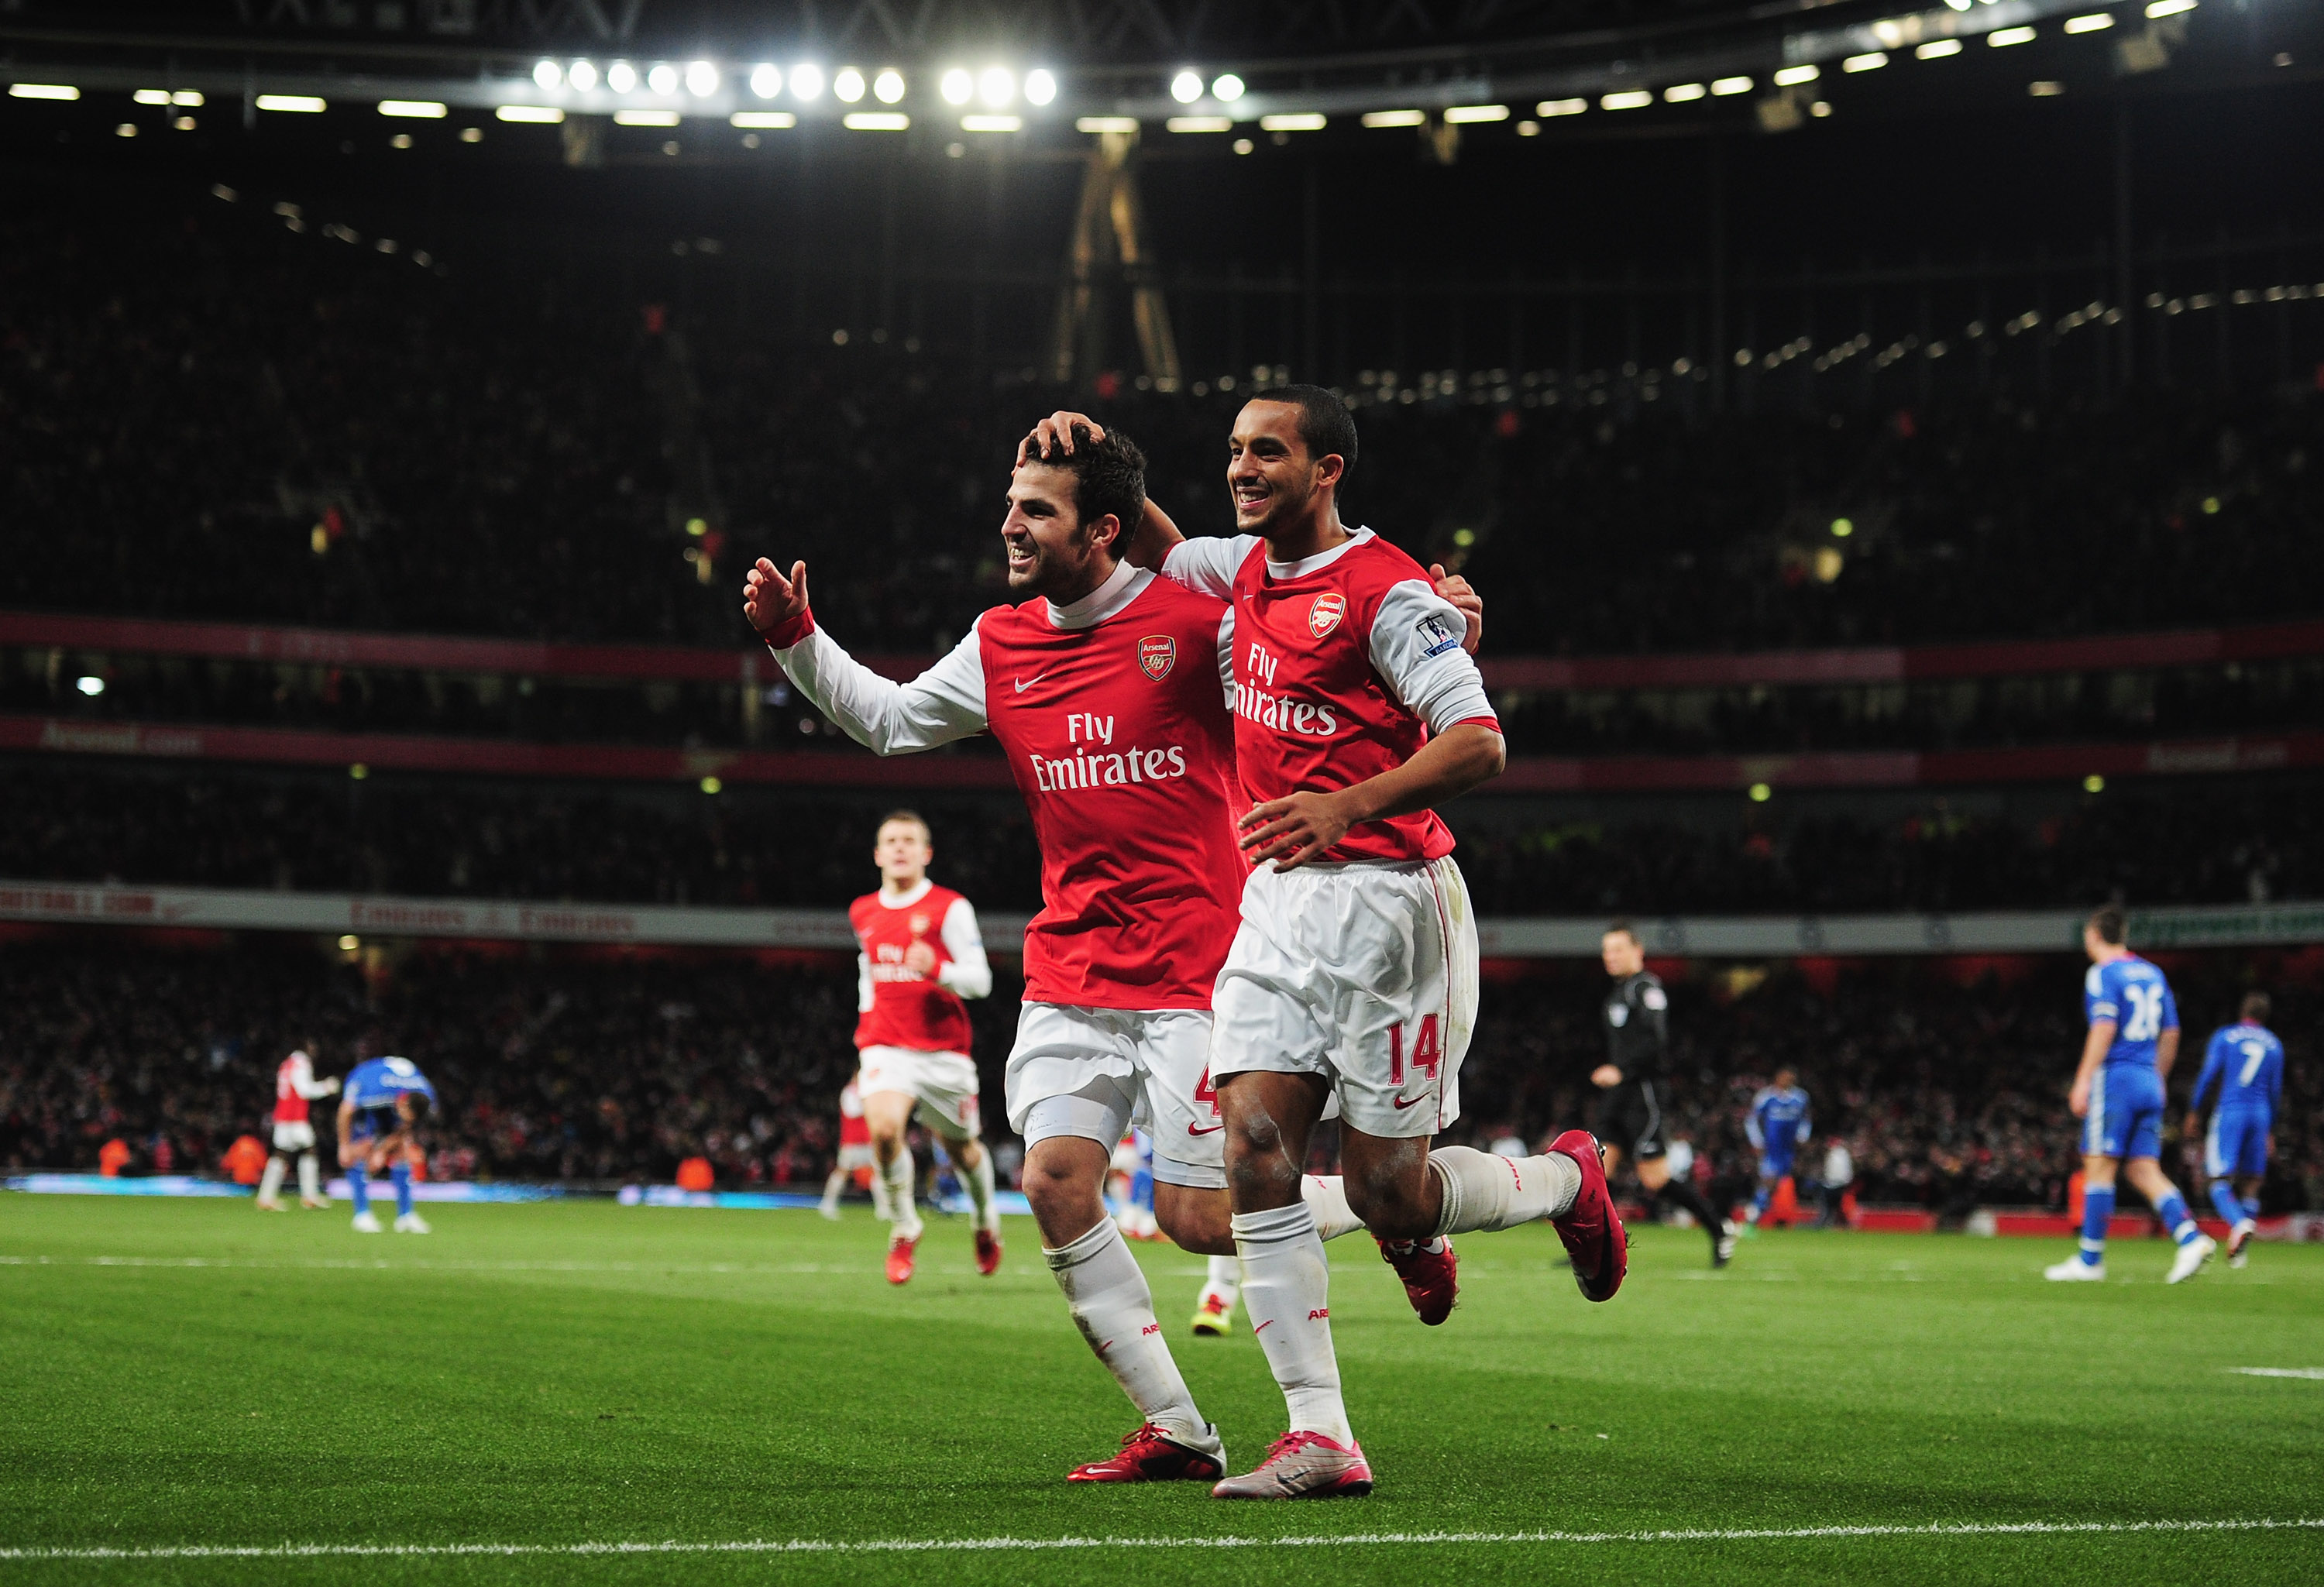 Cesc Fabregas and Theo Wolcott